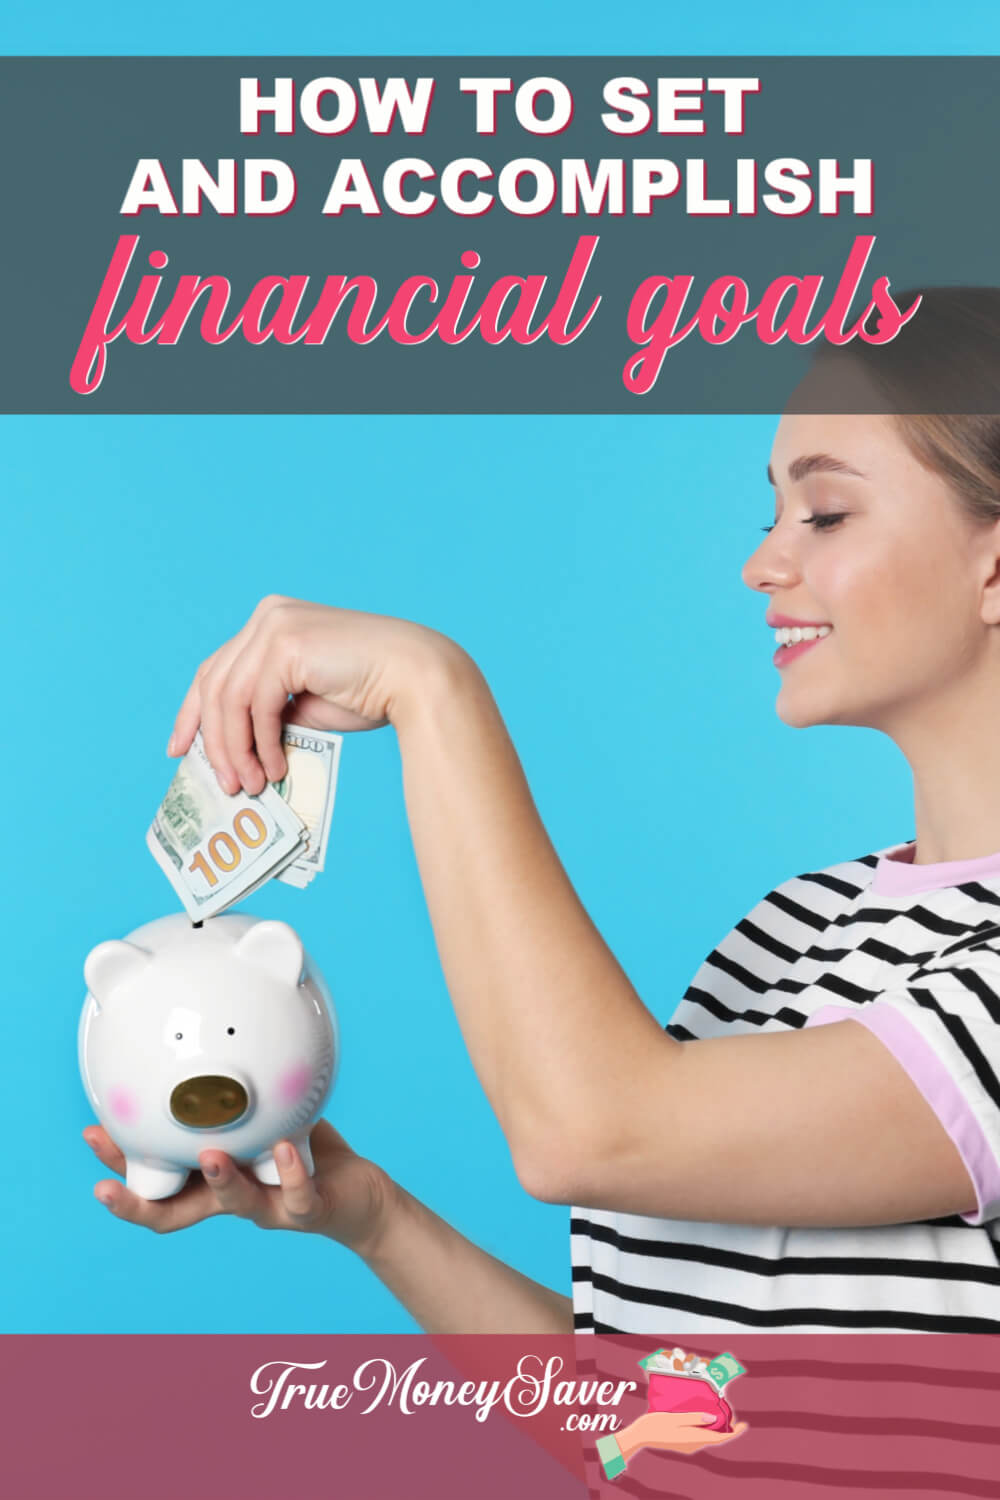 How To Set And Accomplish Financial Goals